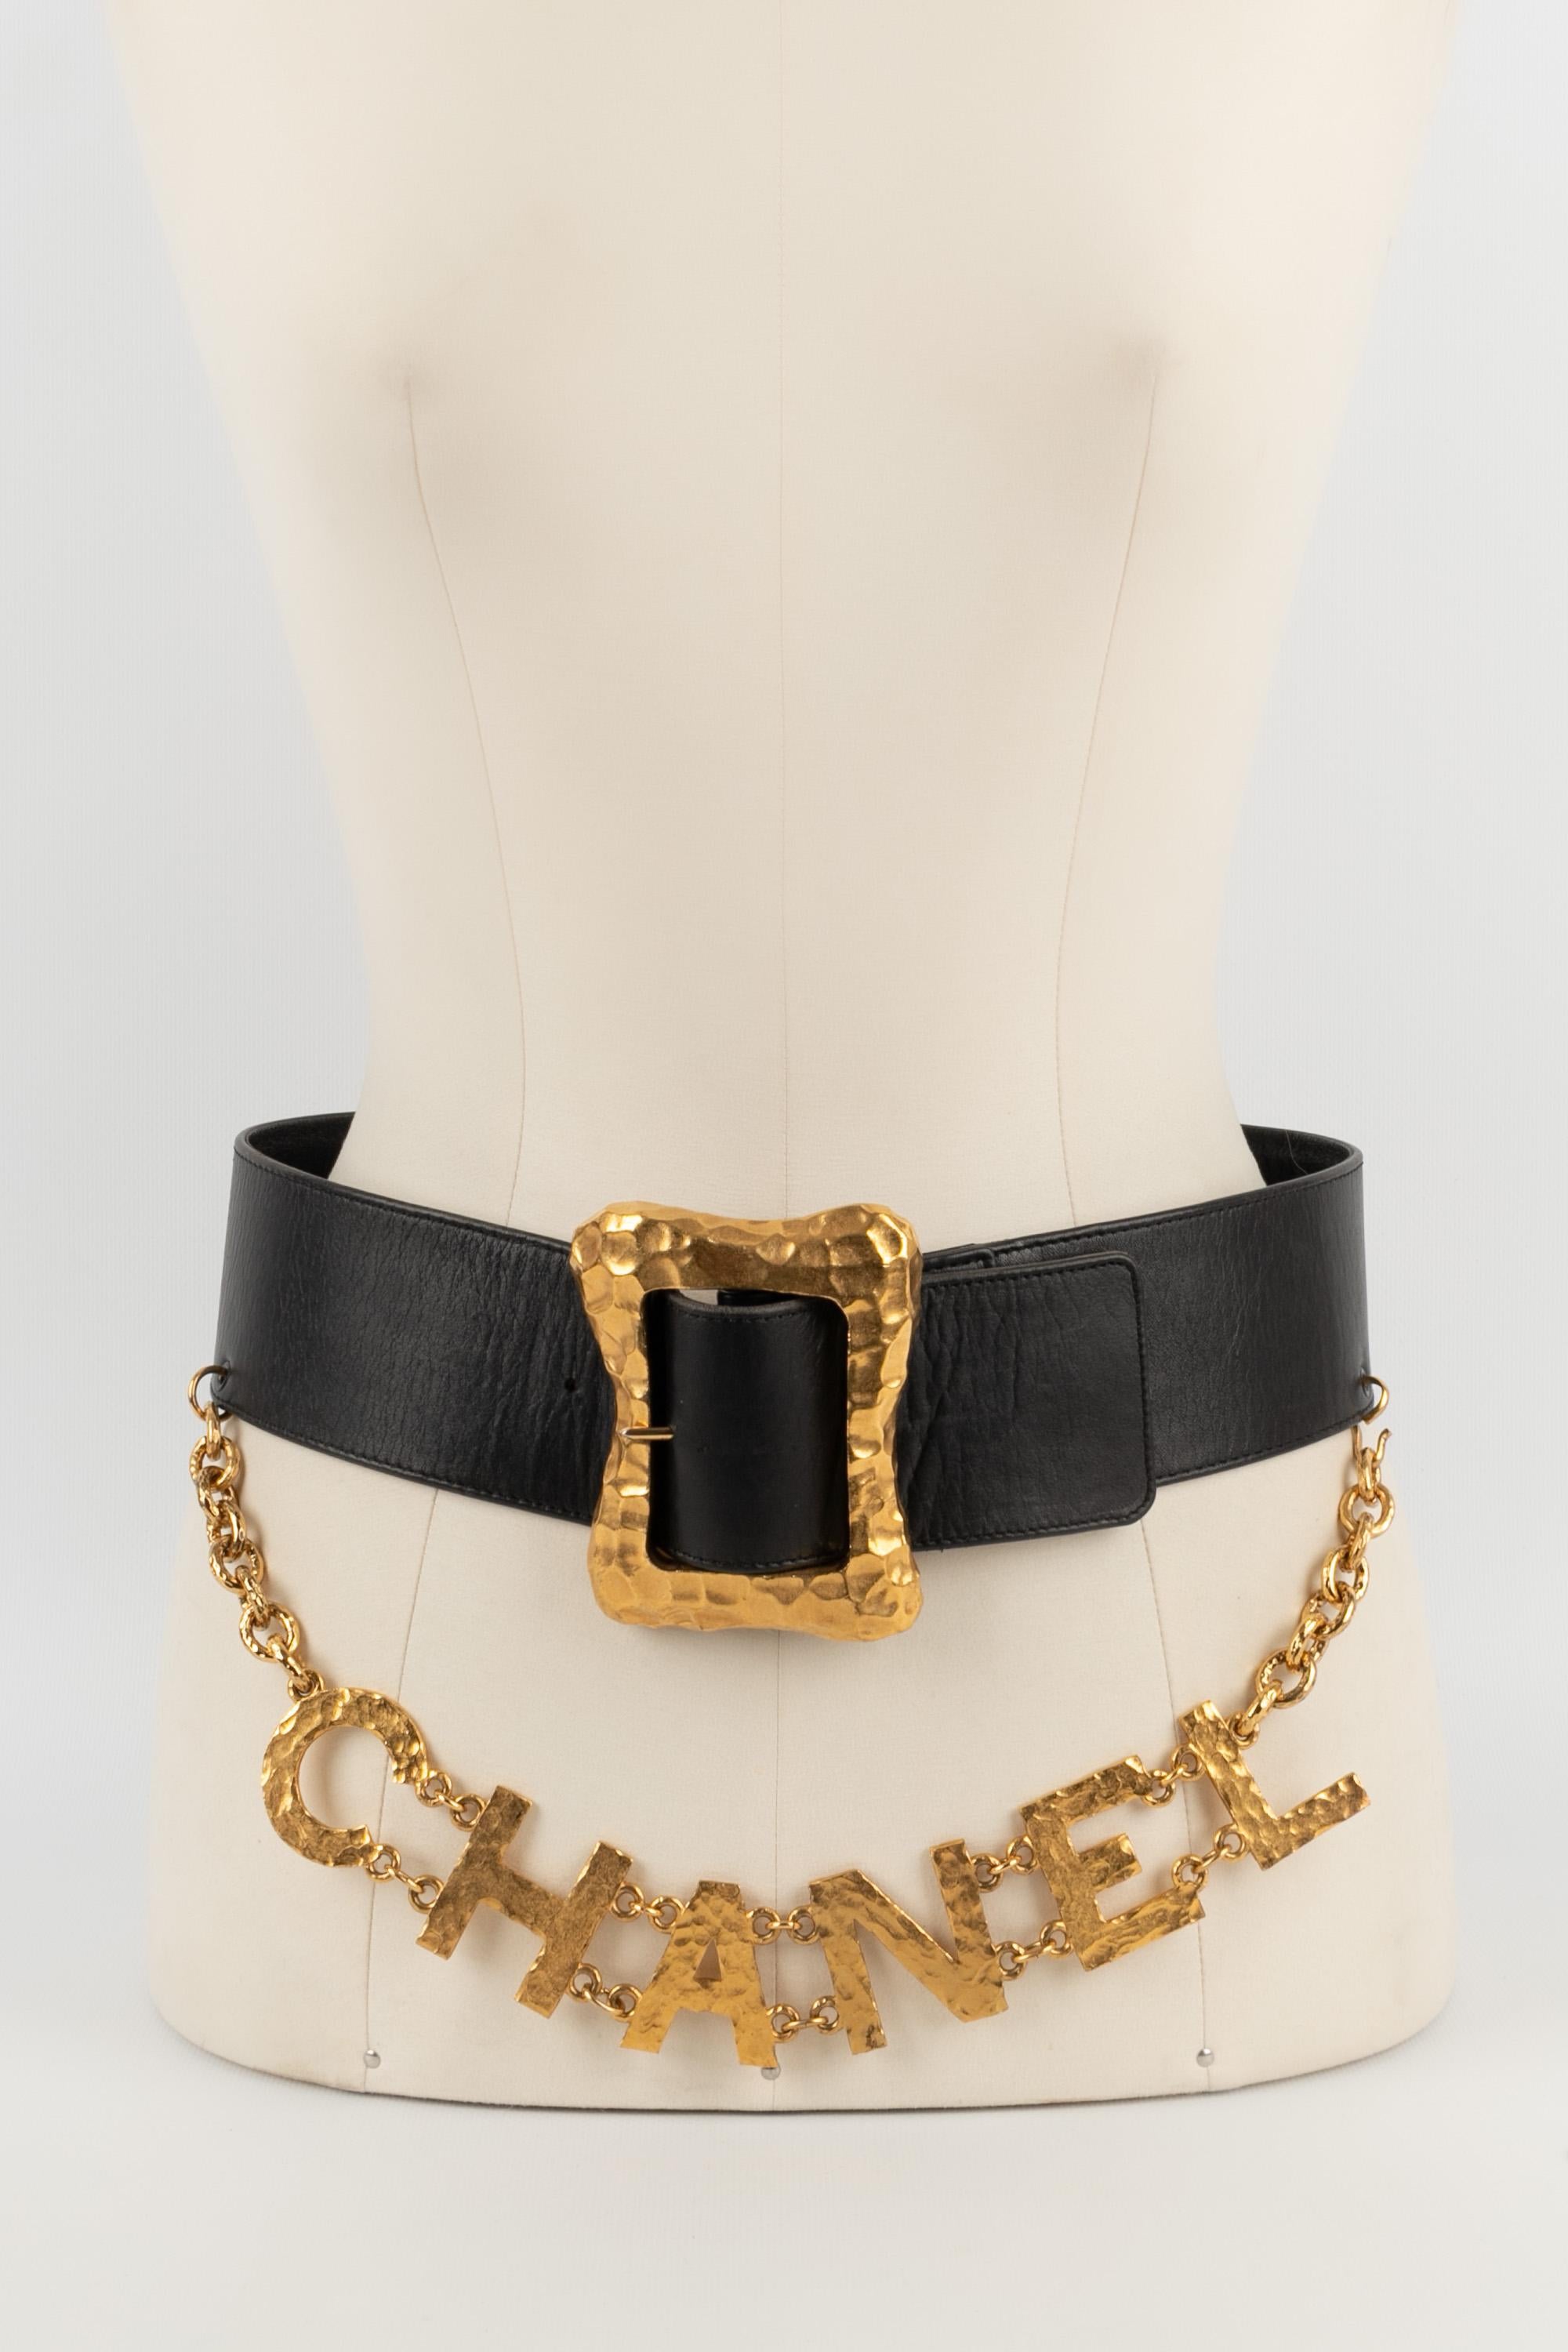 CHANEL - (Made in France) Leather belt with beaten golden metal. 1993 Spring-Summer Collection.

Condition:
Very good condition

Dimensions:
Length: 73 cm to 77 cm

CCB87